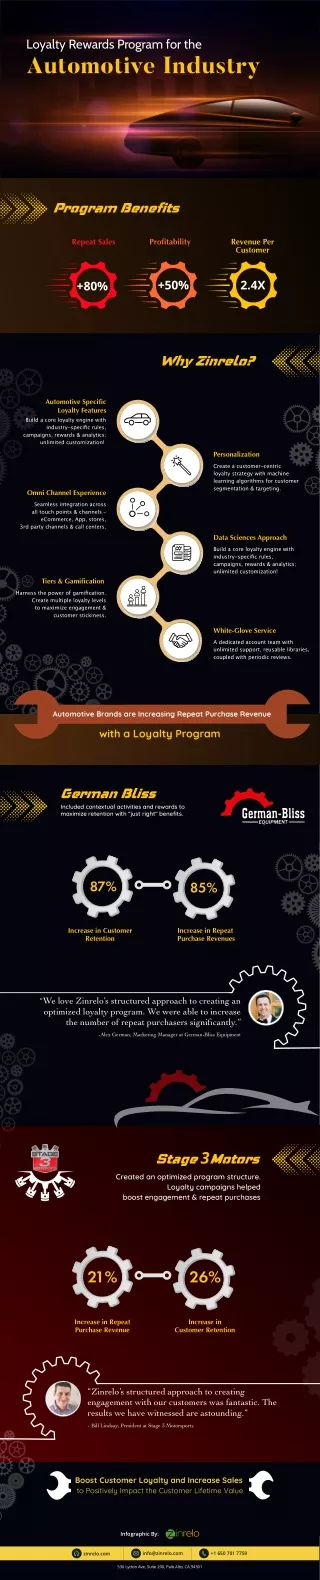 Loyalty rewards program for the automotive industry [infographic]